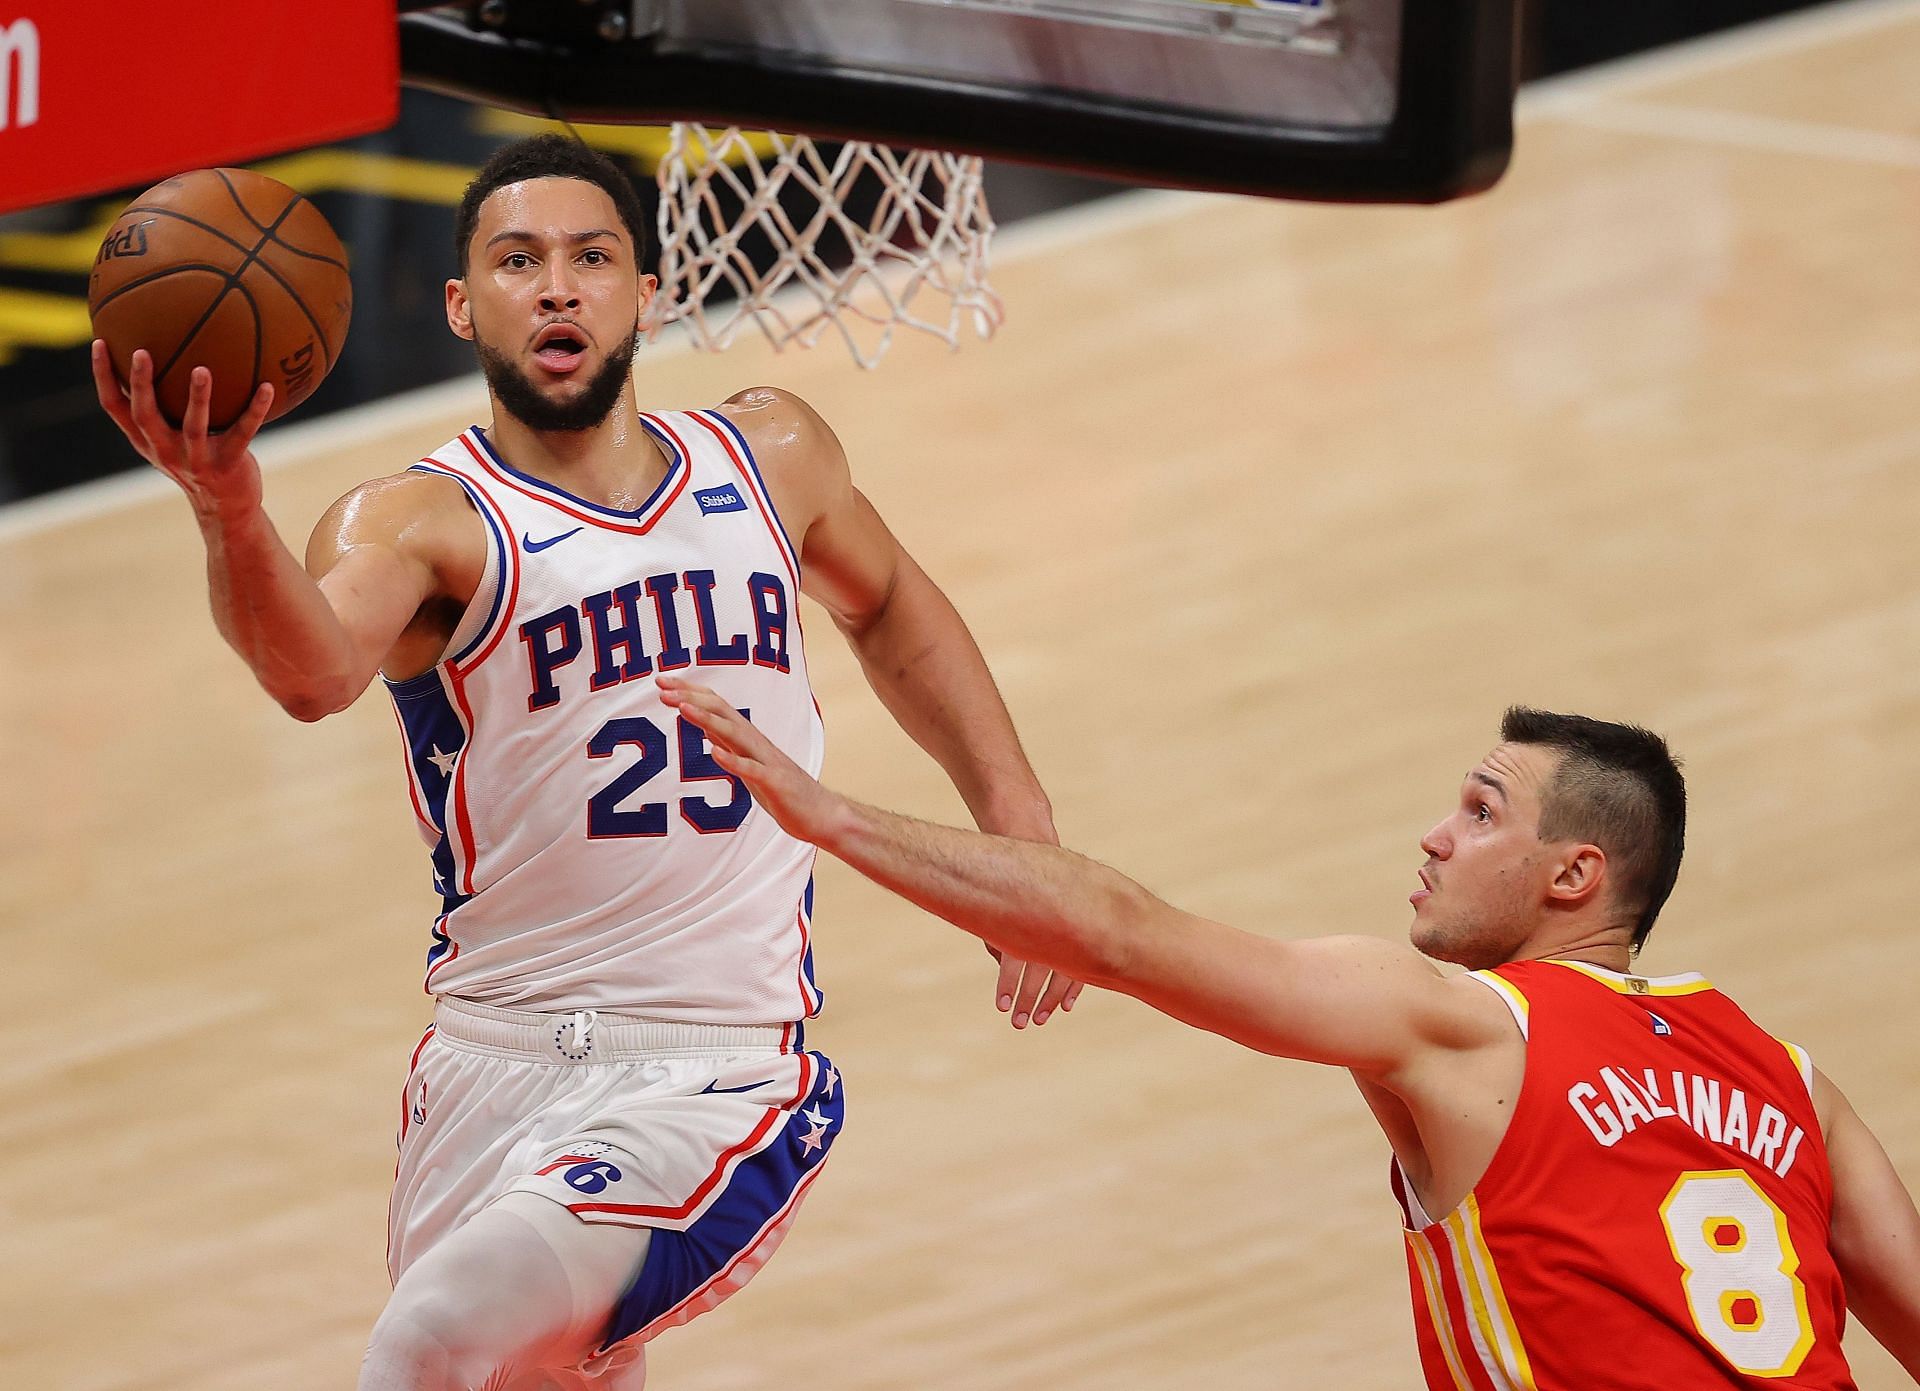 Ben Simmons of the Philadelphia 76ers drives against Danilo Gallinari of the Atlanta Hawks during the Game 3 of the Eastern Conference semifinals June 11 in Atlanta, Georgia.